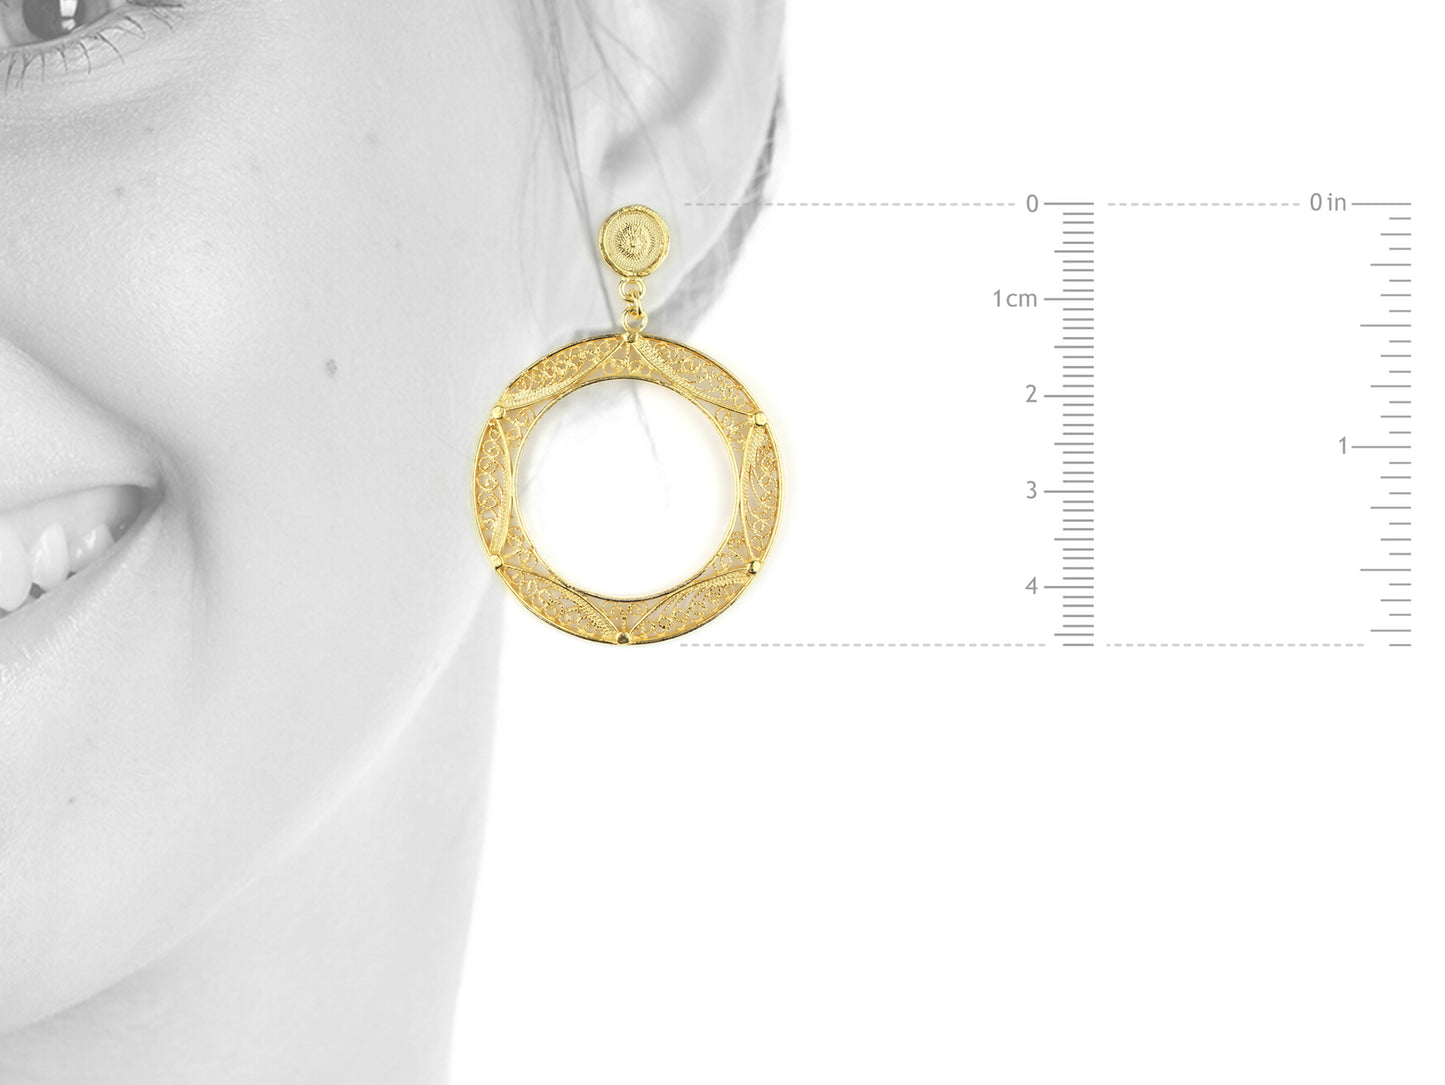 Large Circle Earrings, Portuguese Filigree, 925 Sterling Silver, Gold